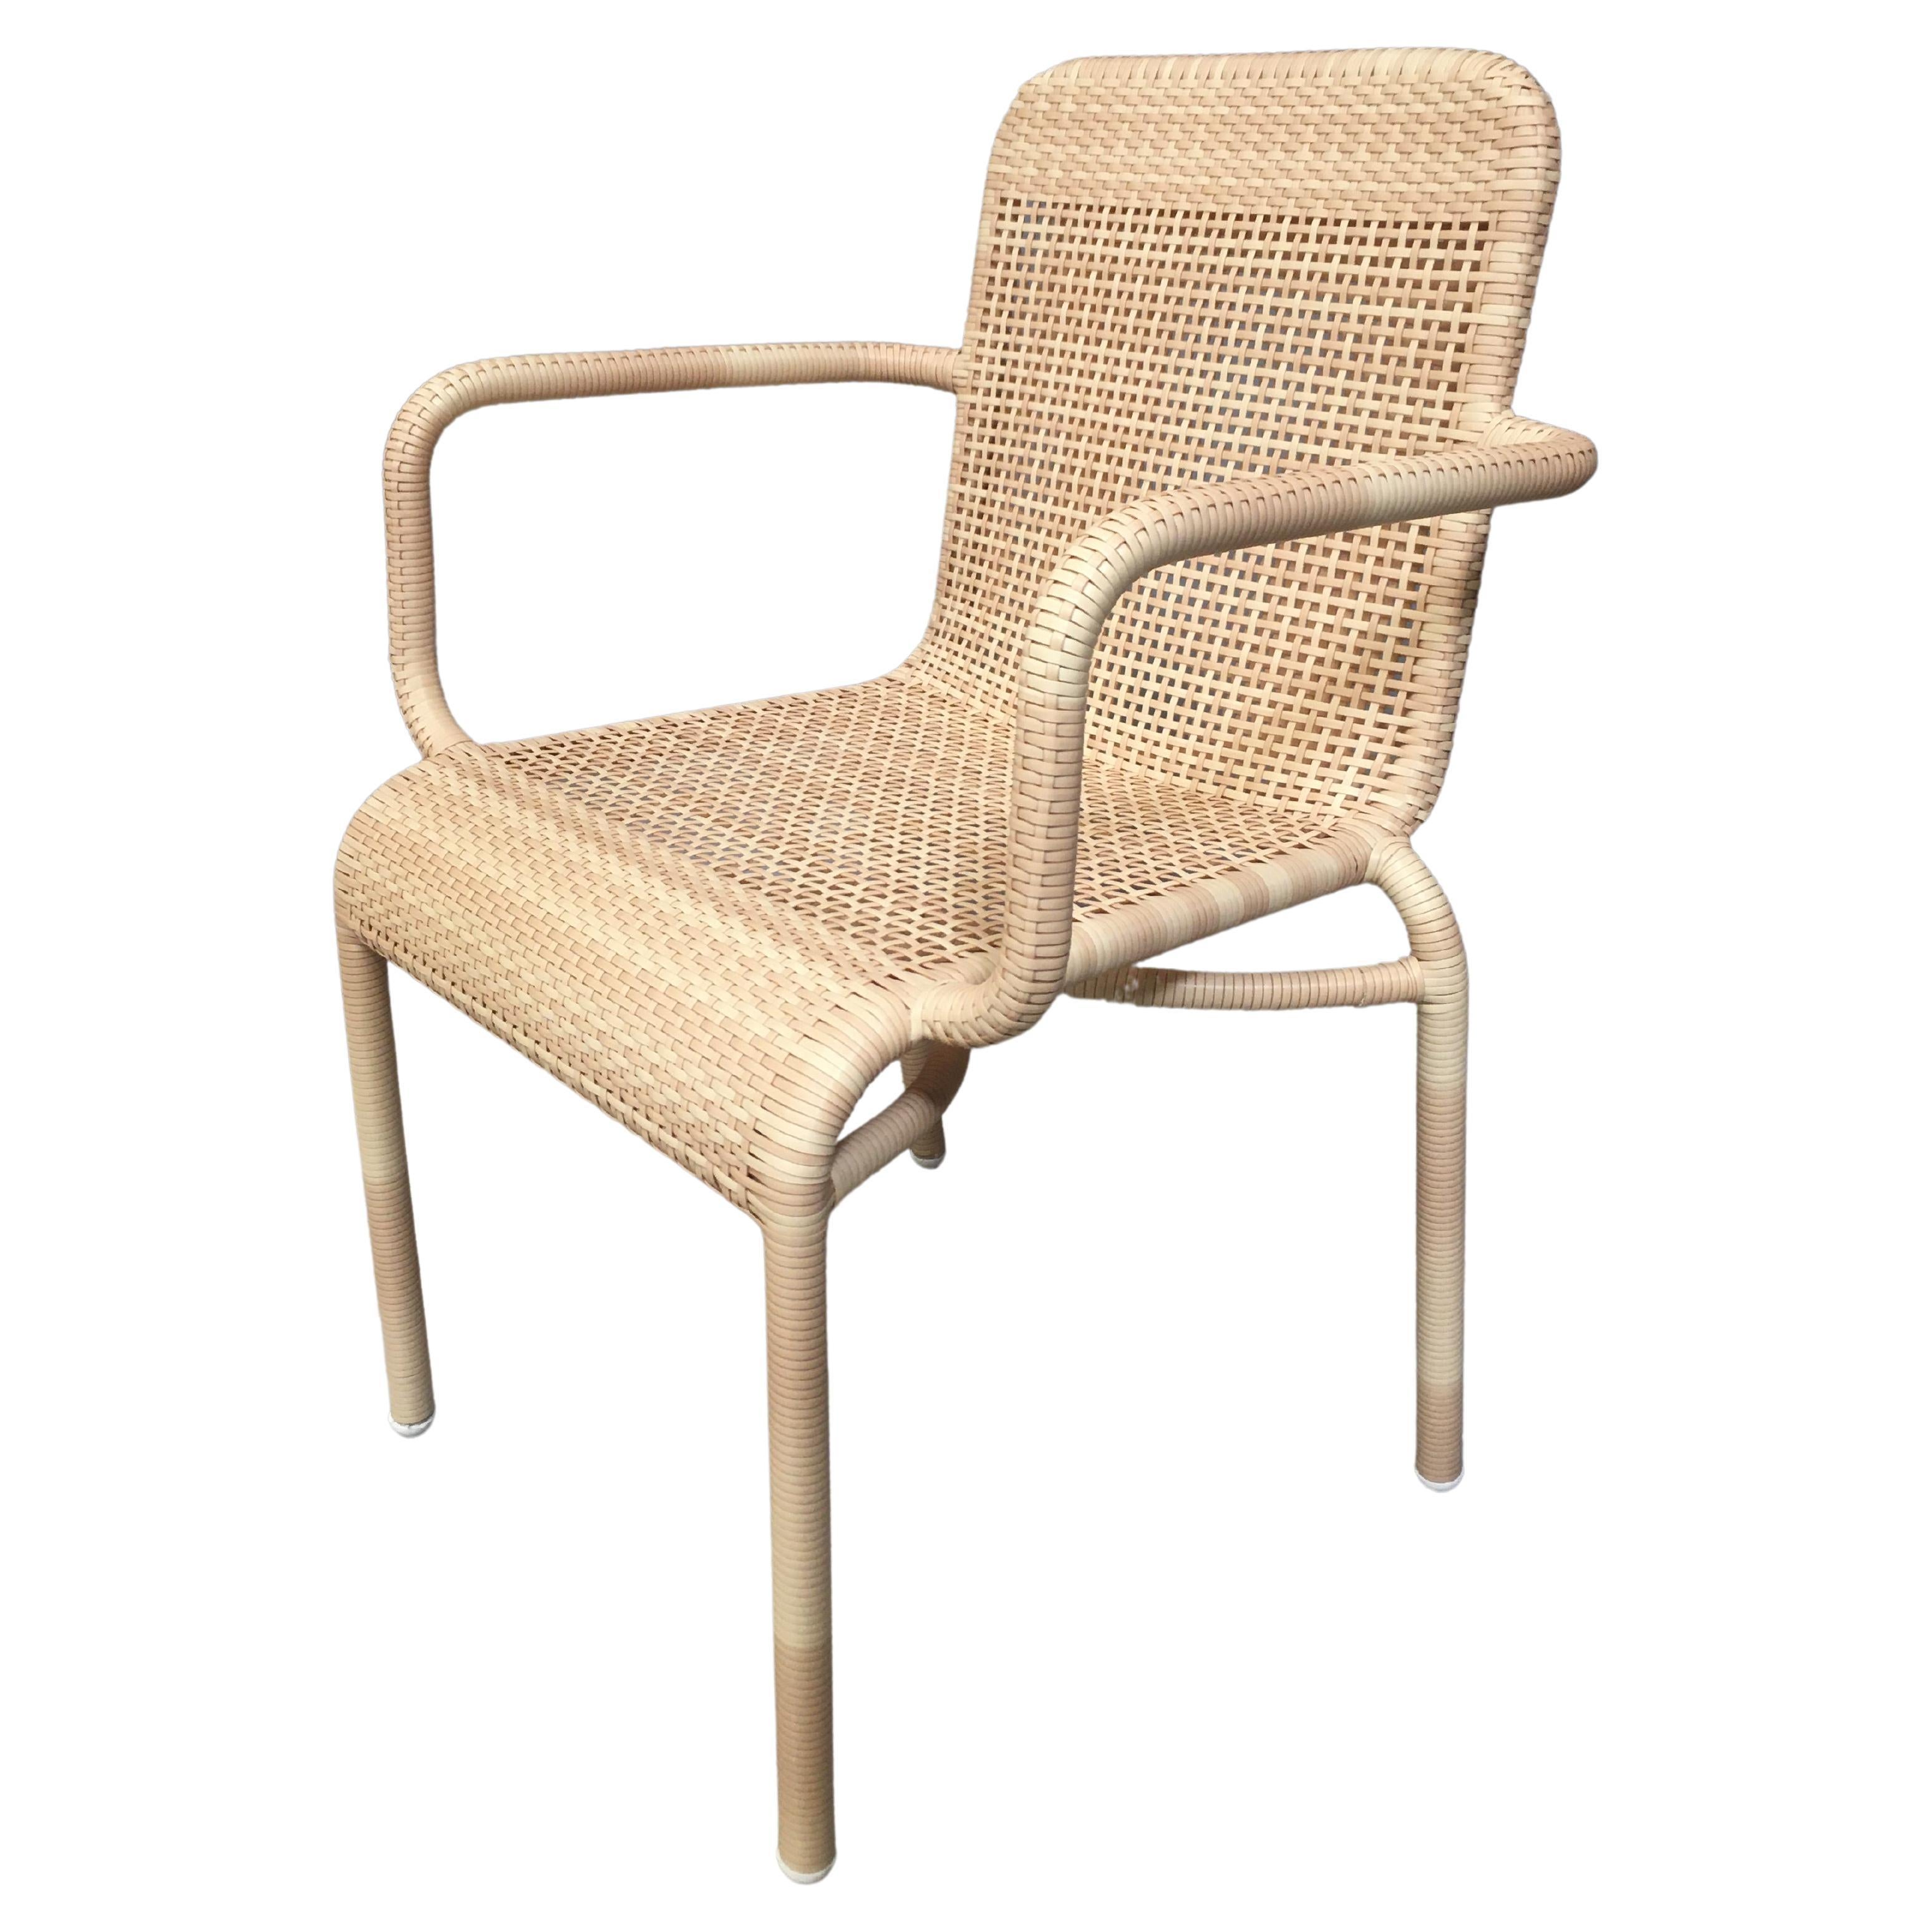 French Design and Braided Resin Rattan Effect Outdoor Chair